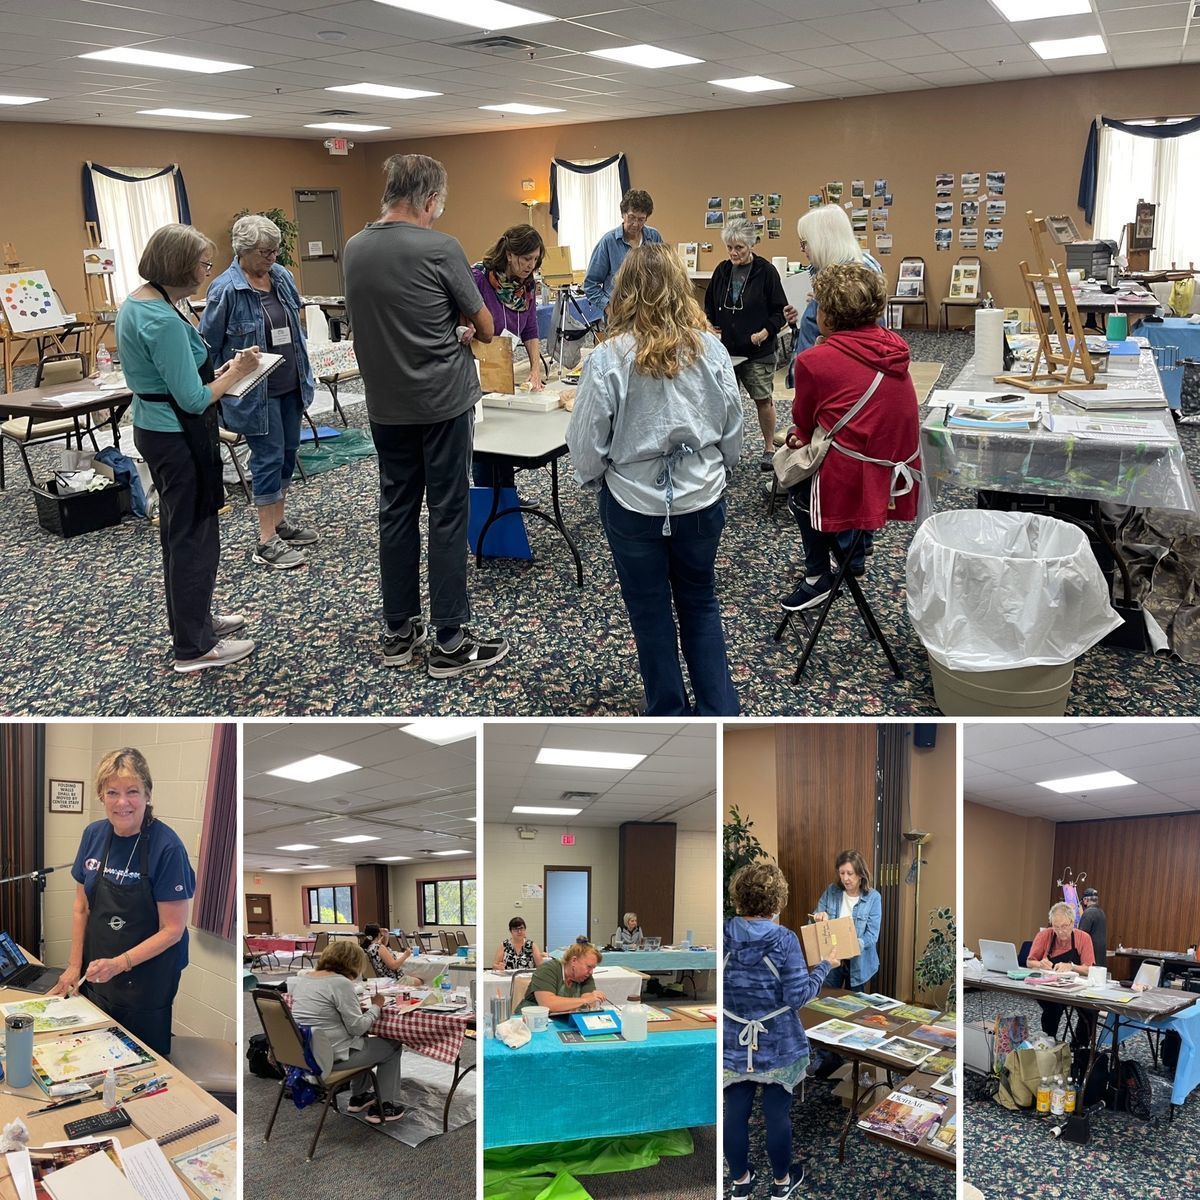 Collage of artists working and learning at the T.L.C. Fall Art Workshop